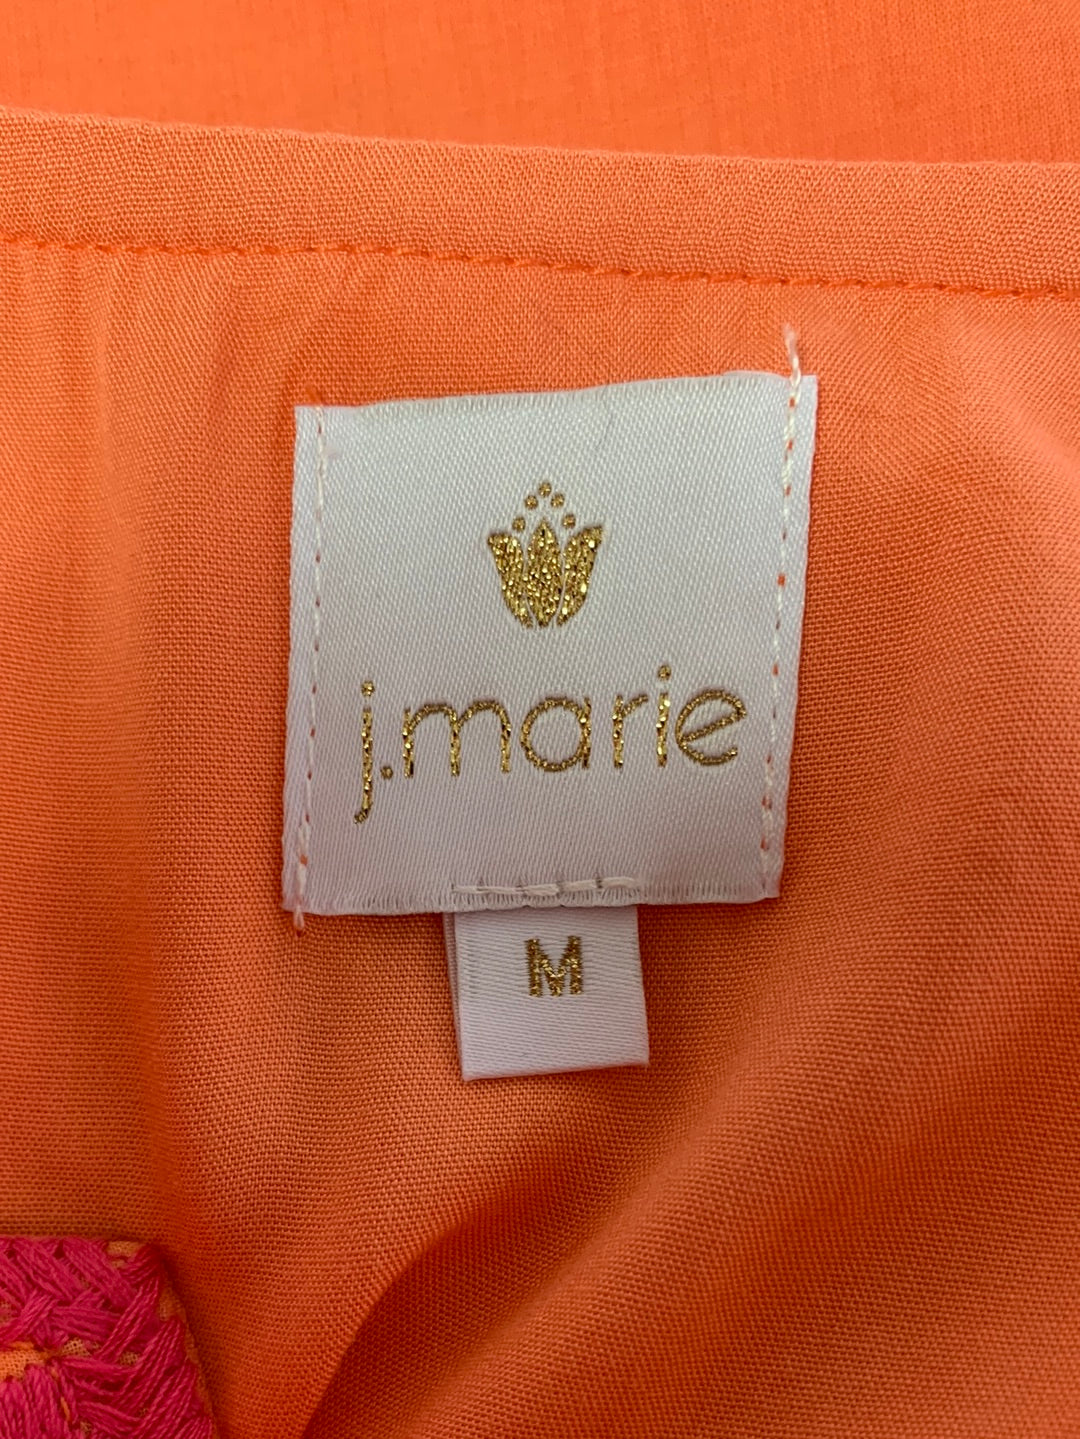 NWT - J MARIE orange pink Embroidered Flutter Sleeve Lined Krista Top - M